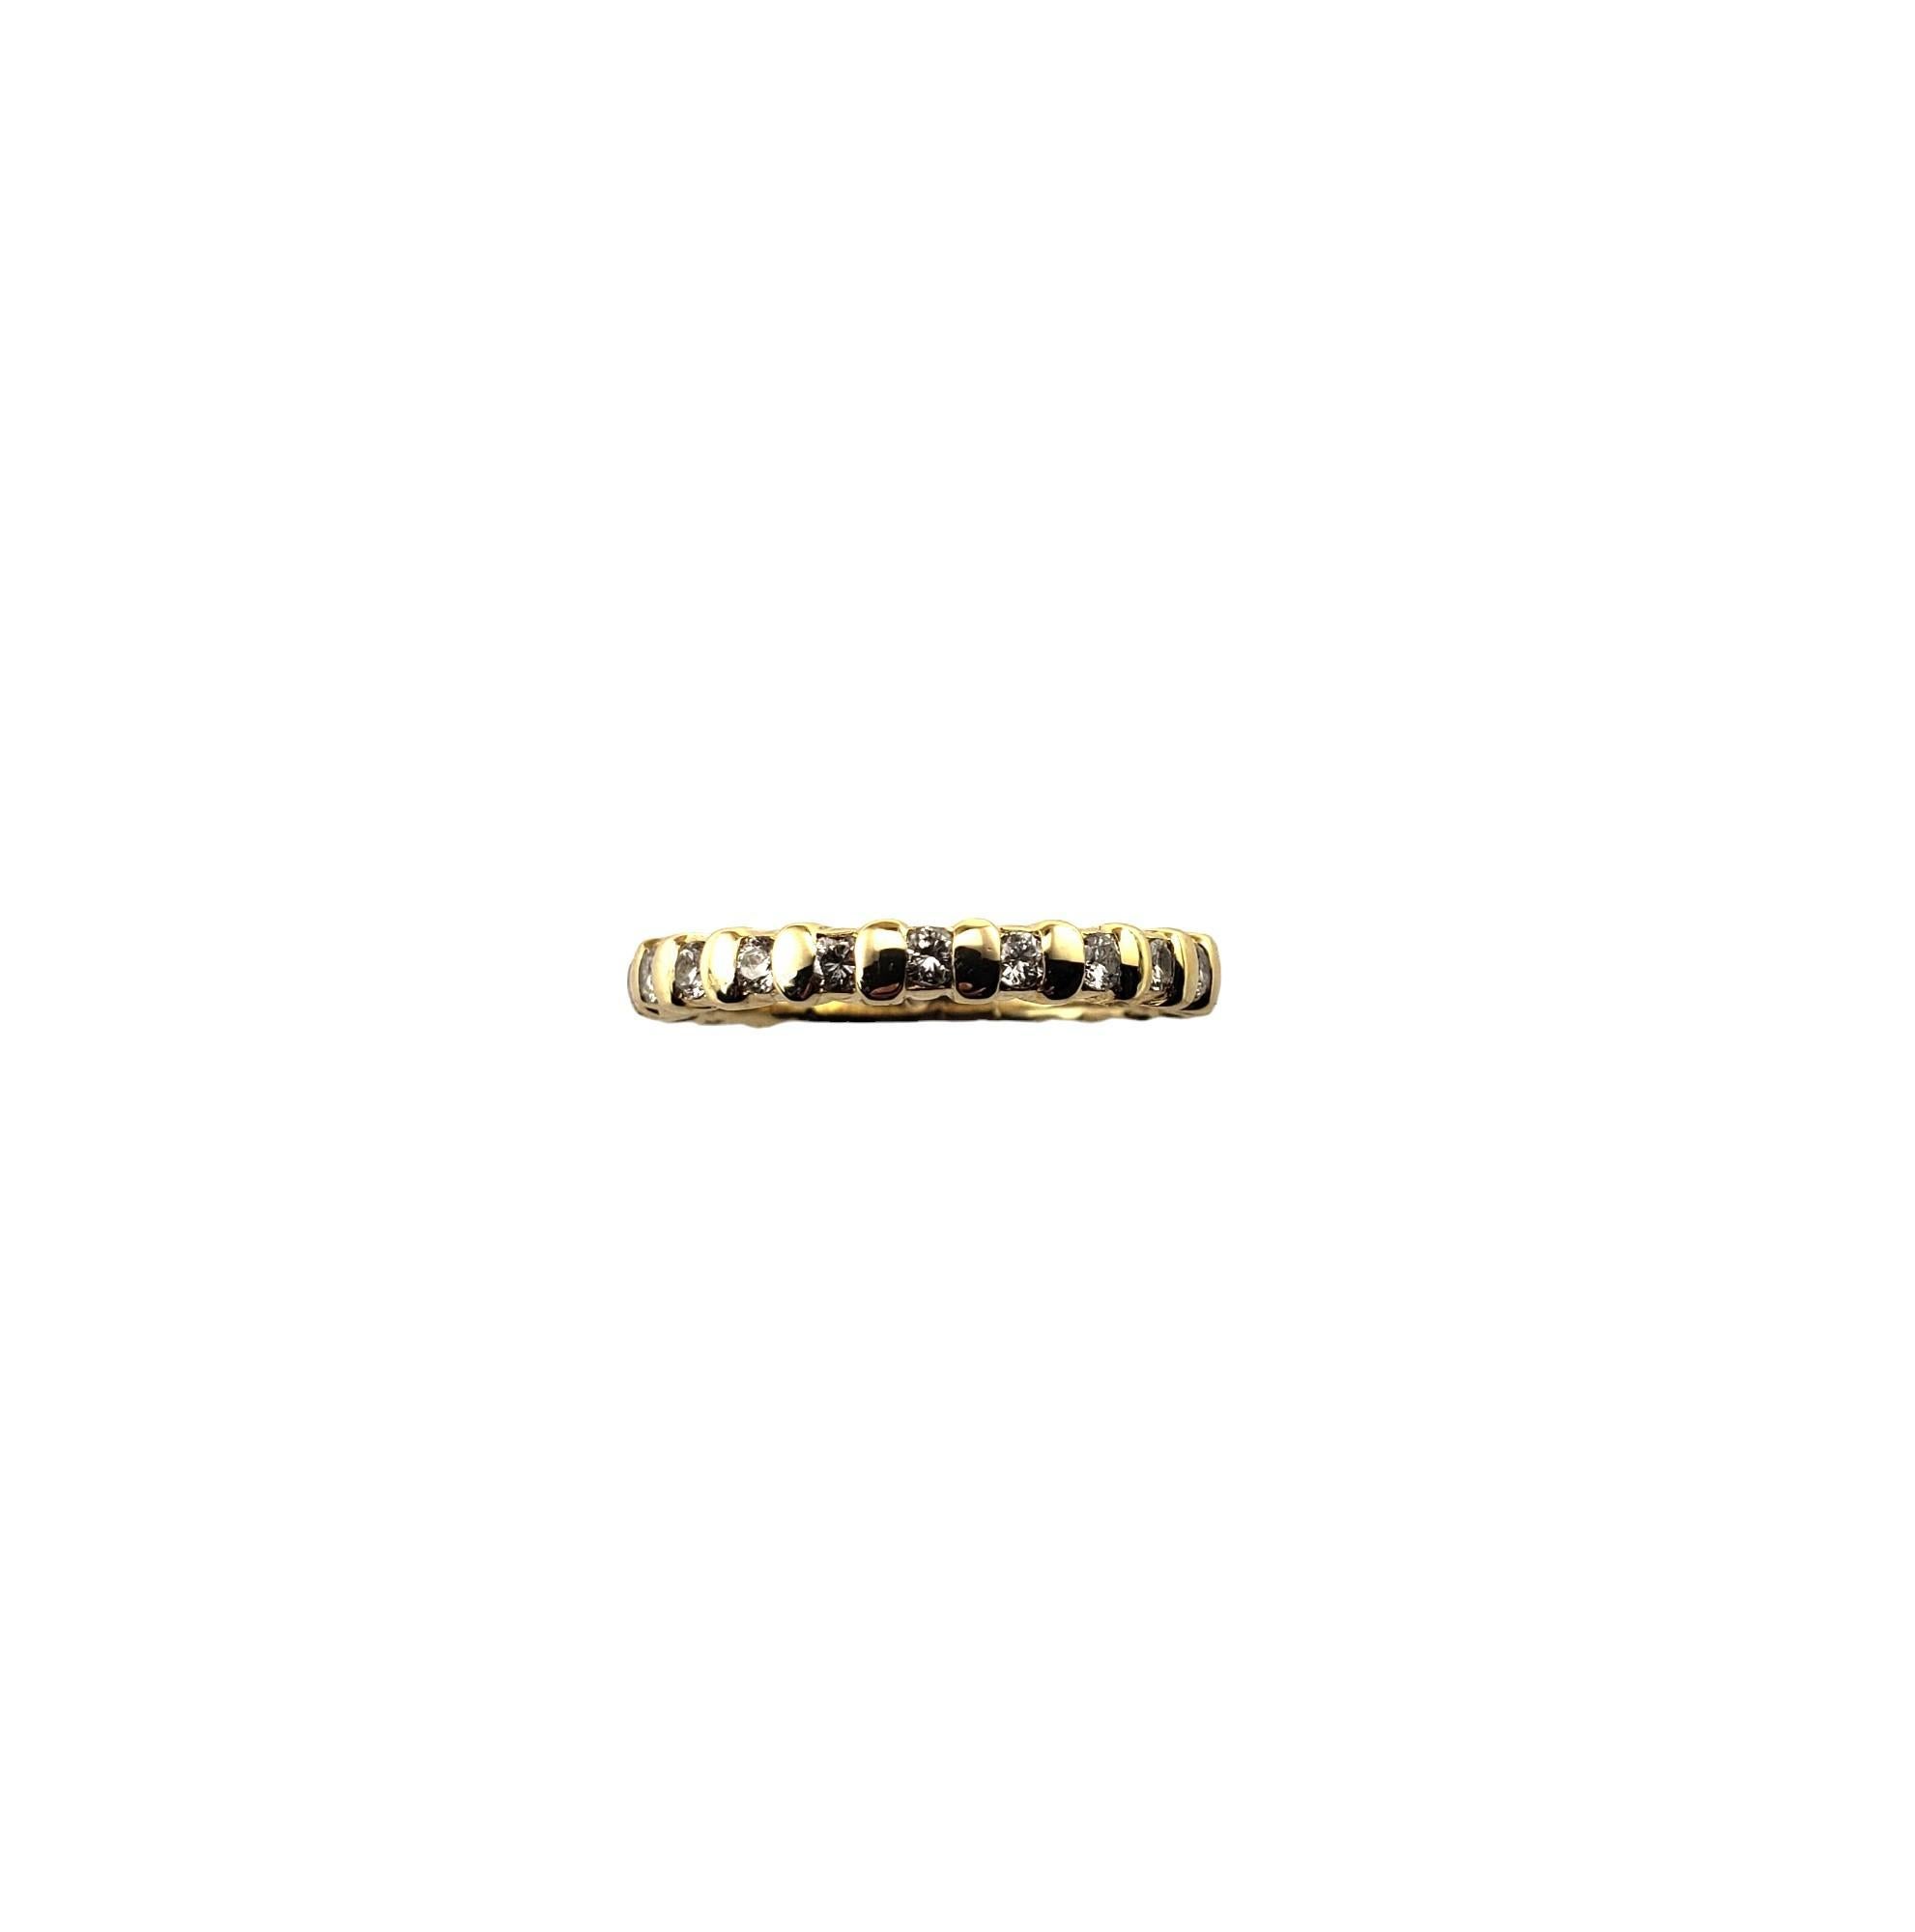 Vintage 14 Karat Yellow Gold Diamond Eternity Band Size 6-

This sparkling band features 22 round brilliant cut diamonds set in beautifully detailed 14K yellow gold.  Width: 2.5 mm.

Approximate total diamond weight:   .44 ct.

Diamond clarity: